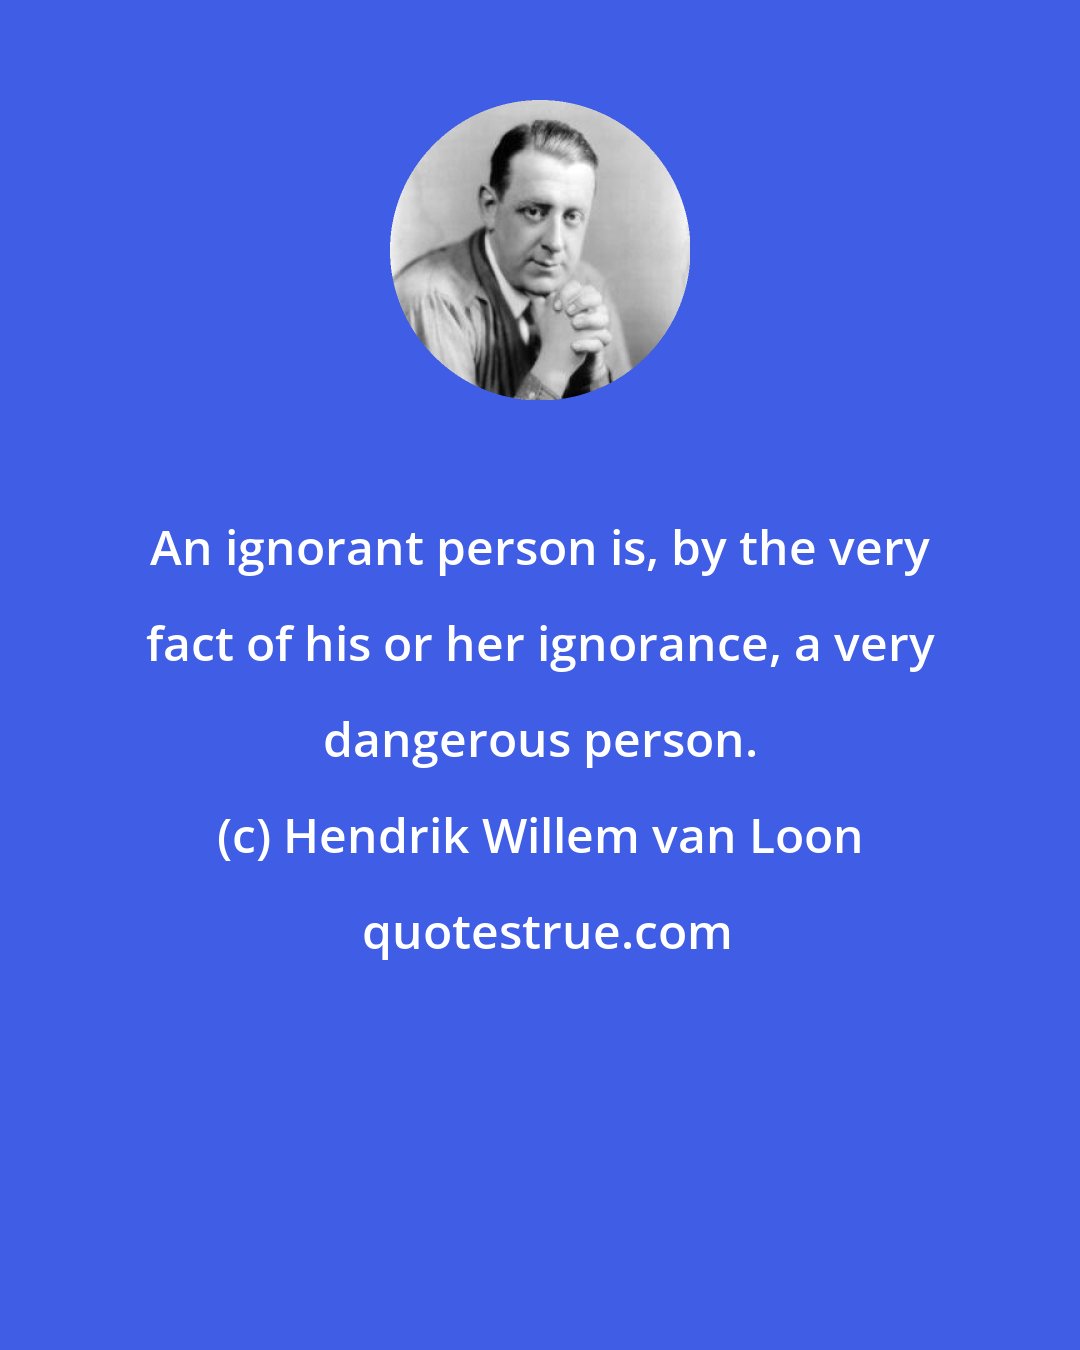 Hendrik Willem van Loon: An ignorant person is, by the very fact of his or her ignorance, a very dangerous person.